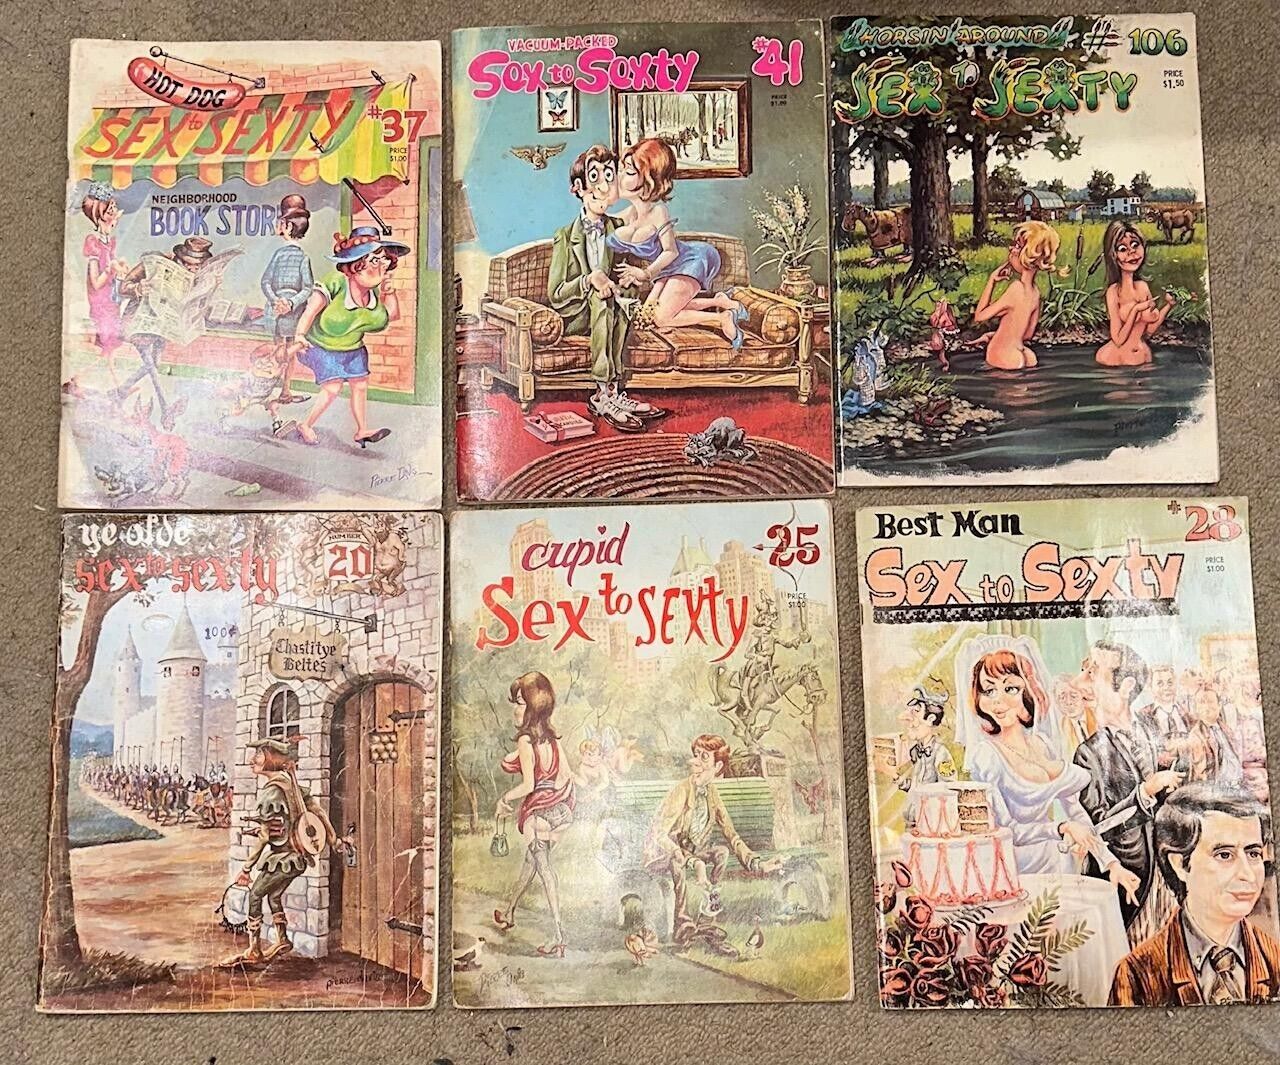 Lot of 6 - 1971-78 Sex to Sexty Adult Humor Cartoon Magazines 20,25,28,37,41,106